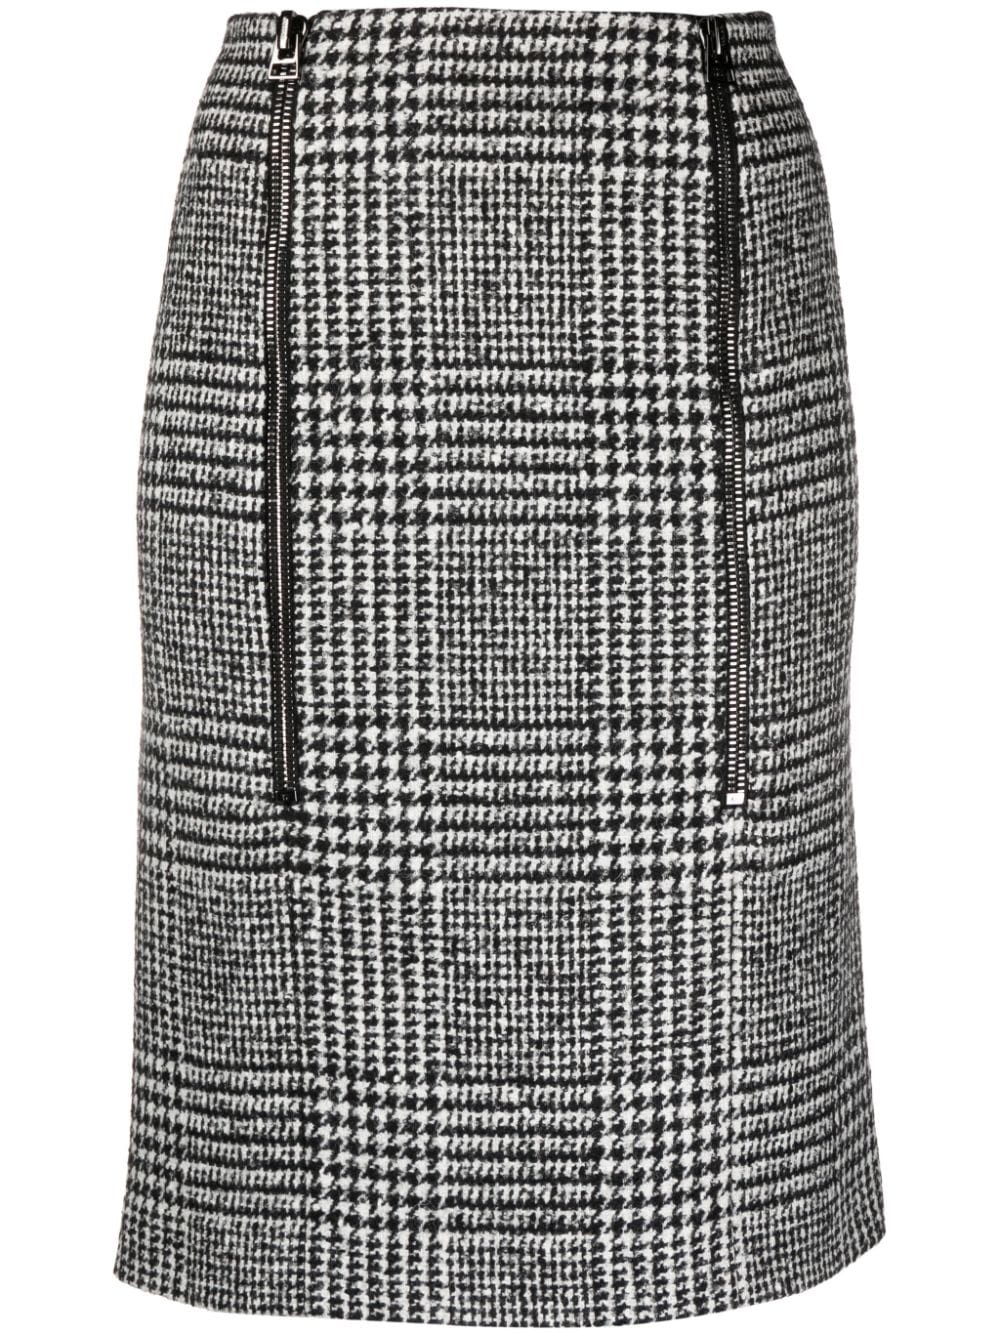 Prince of Wales pattern zip-up skirt - 1